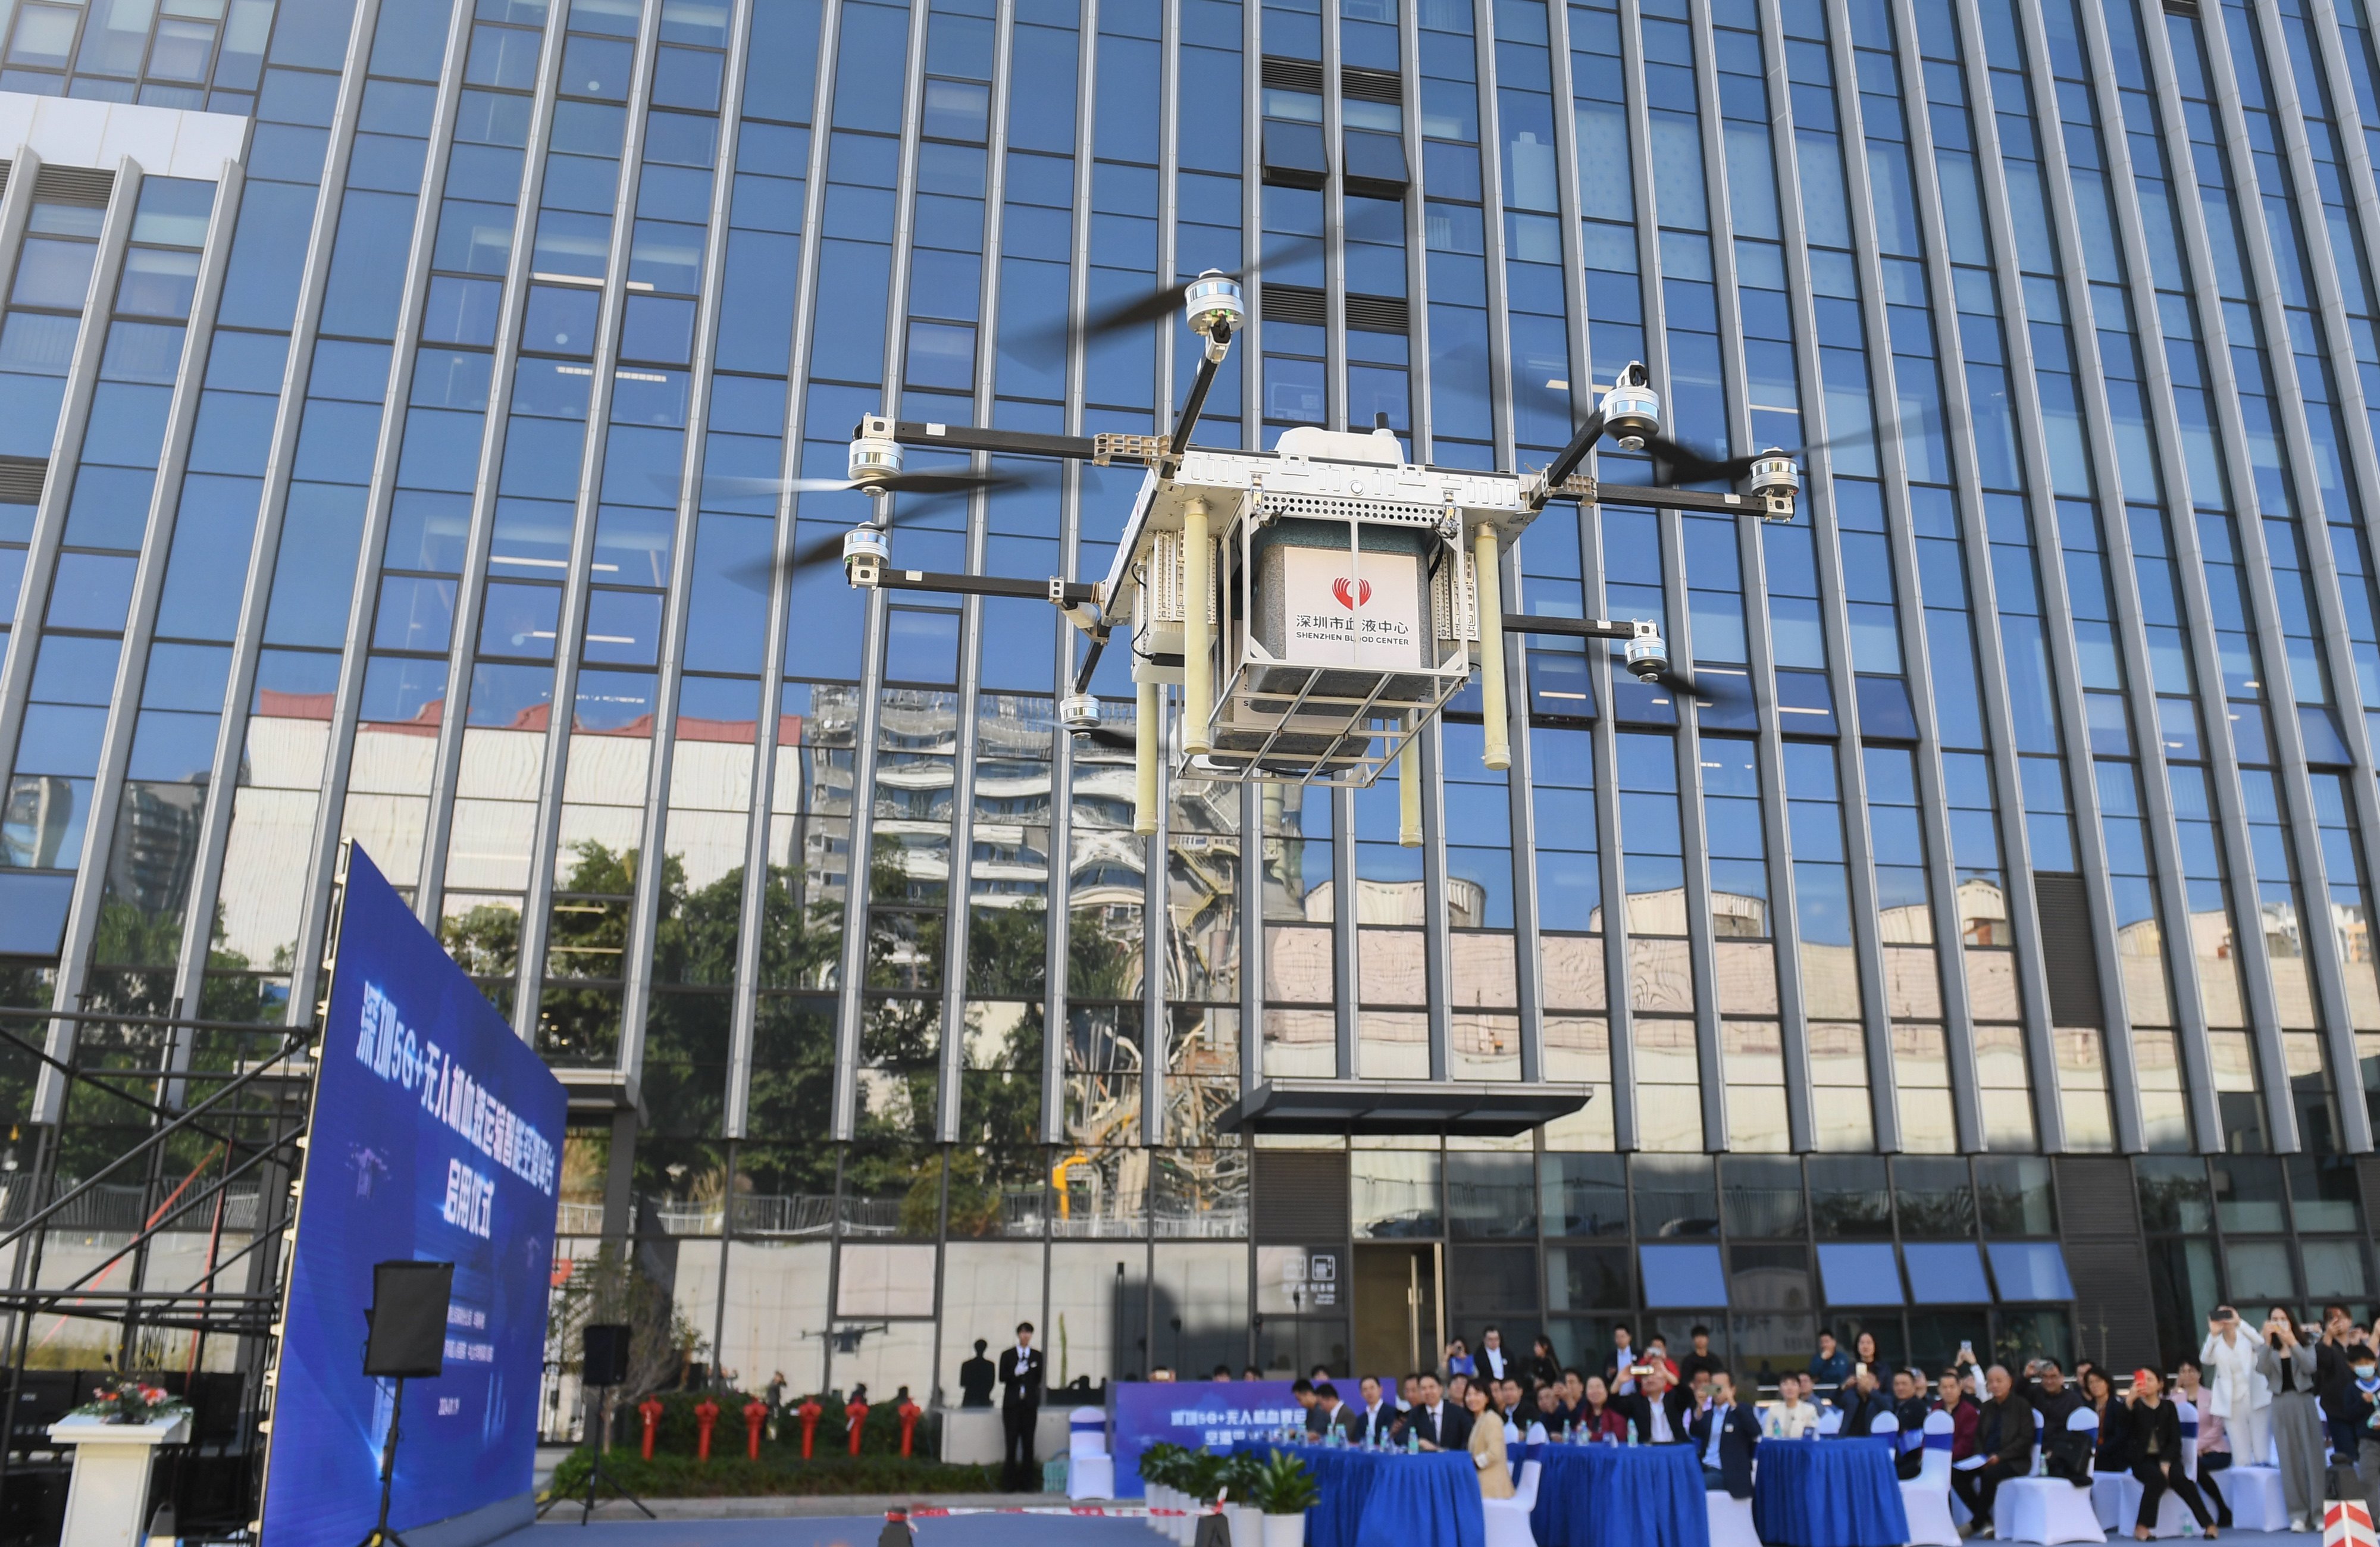 A drone carrying blood takes off for the Shenzhen Traditional Chinese Medicine Hospital from the Shenzhen Blood Centre on January 19. The city in southern China is a leader in drone delivery. Photo: Xinhua